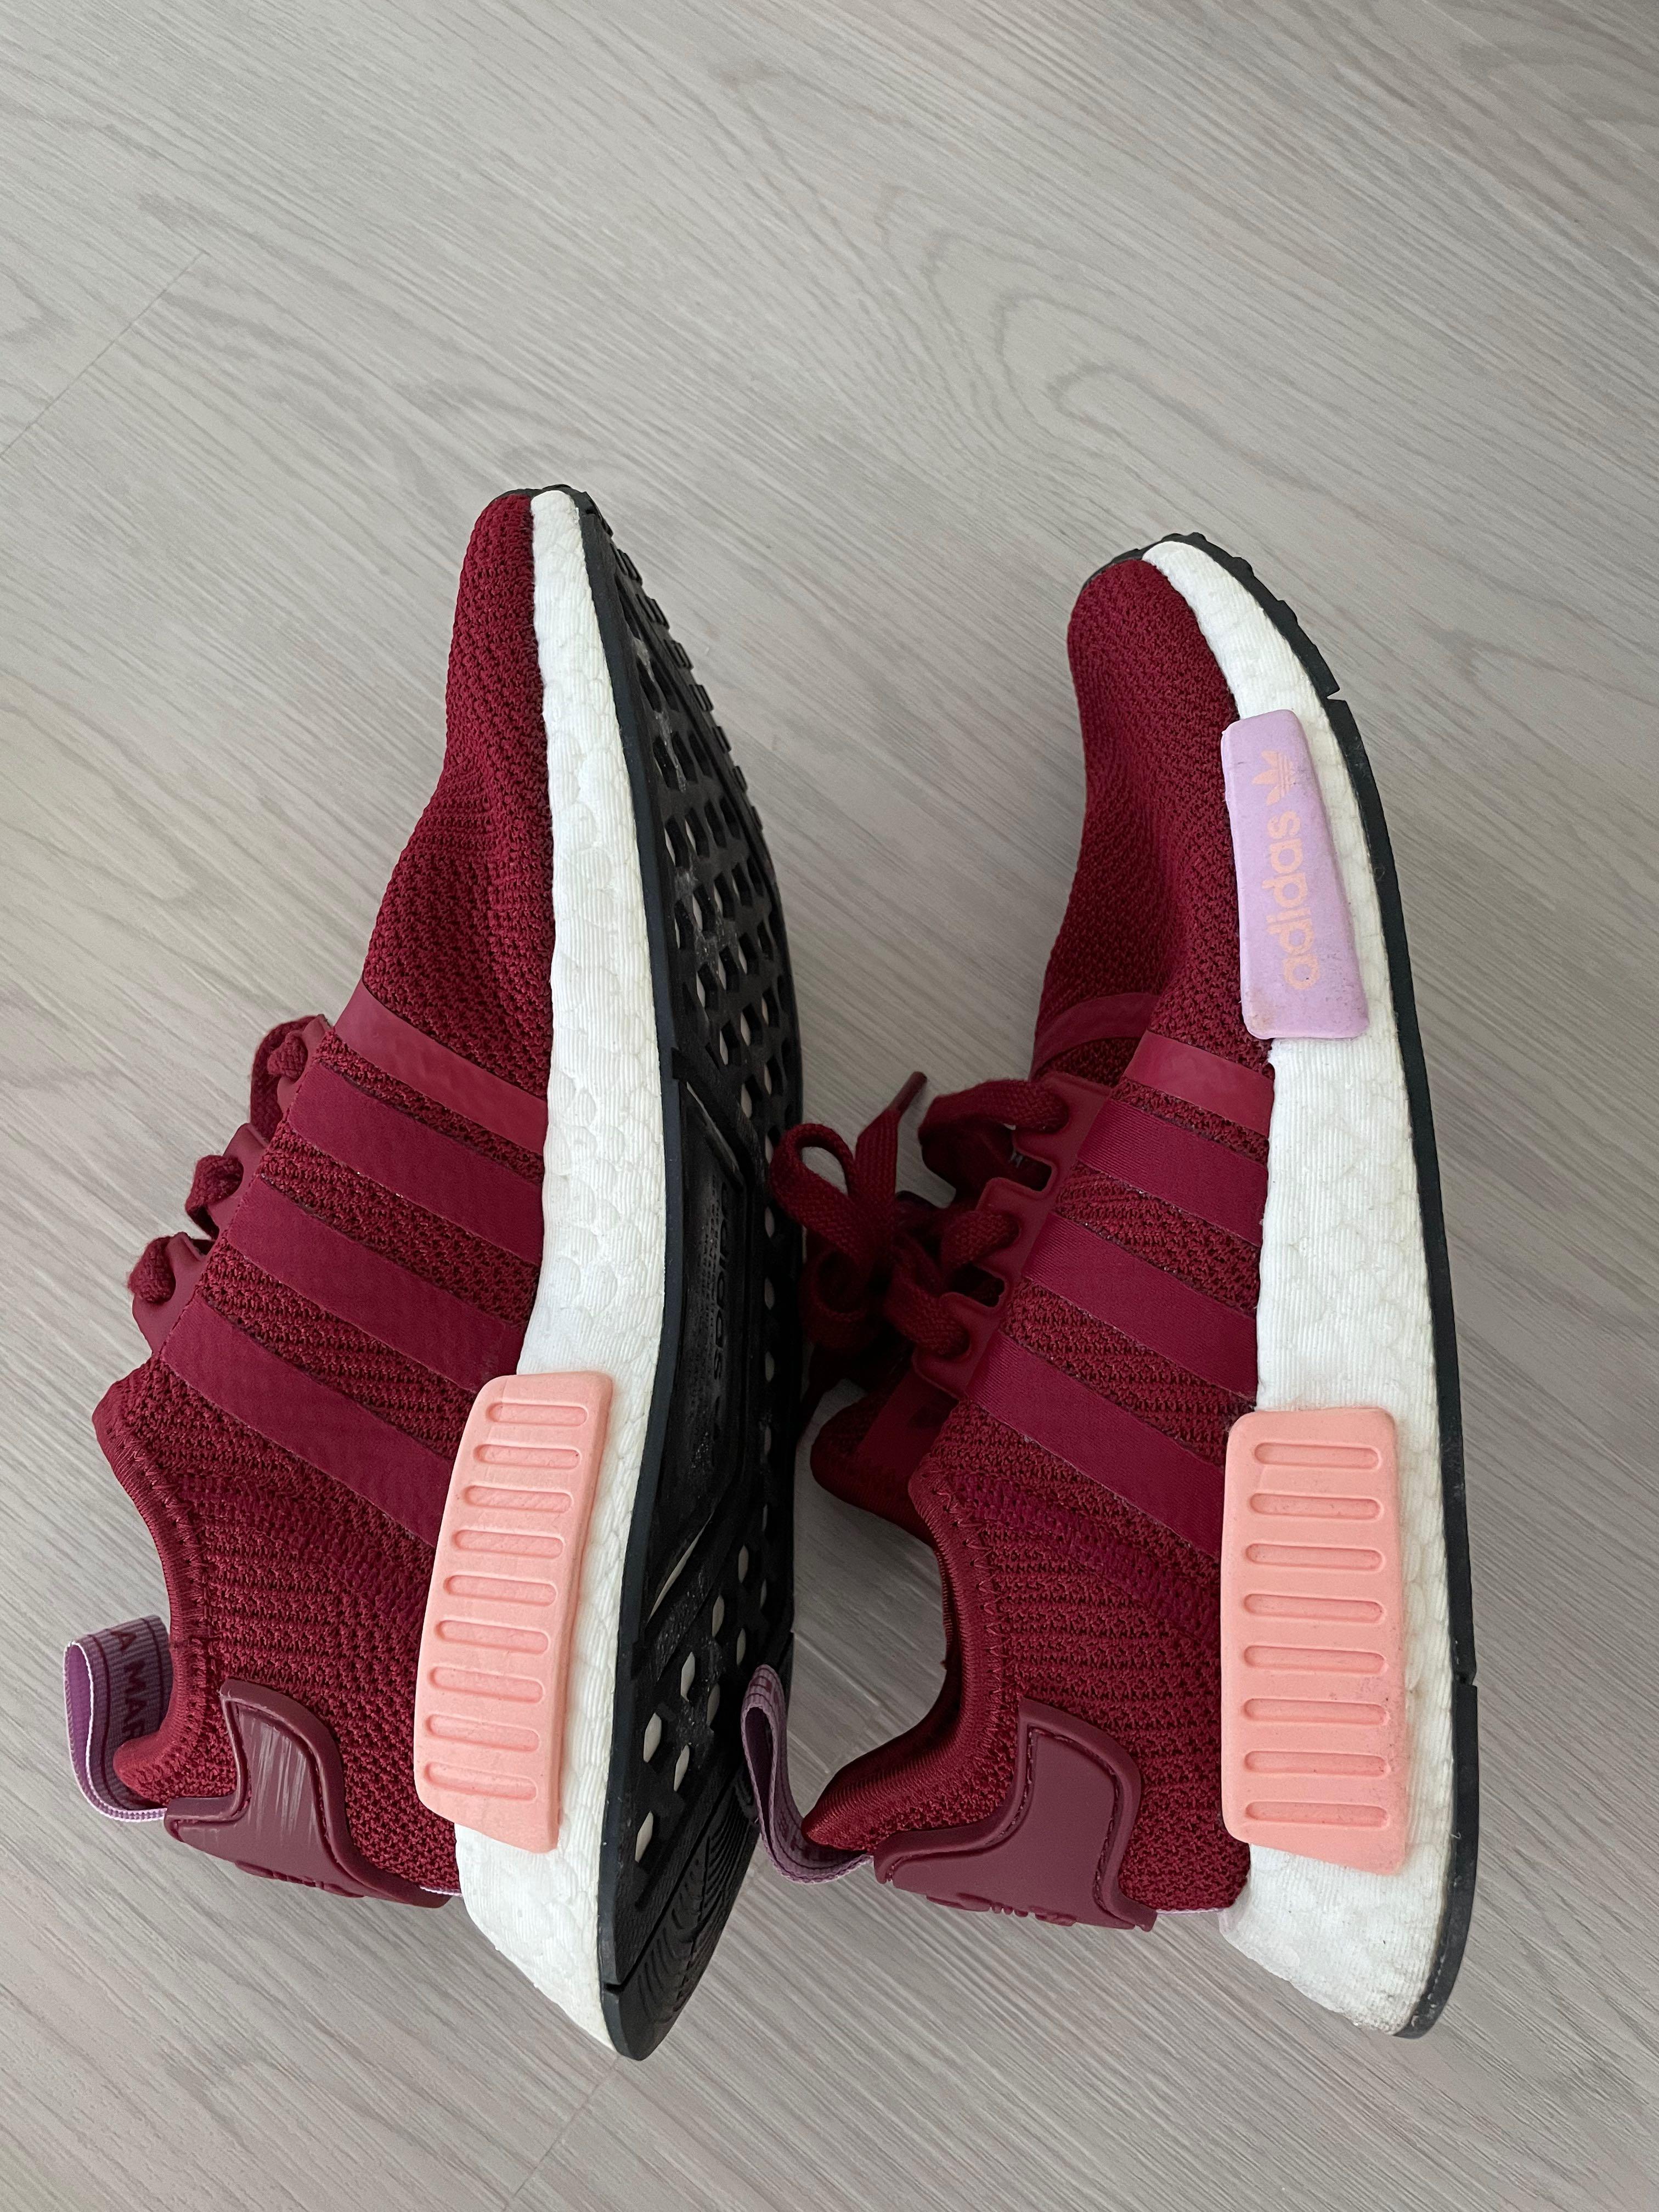 por inadvertencia Comorama Colectivo Adidas NMD R1 Low-top sneakers wine red, Women's Fashion, Footwear,  Sneakers on Carousell